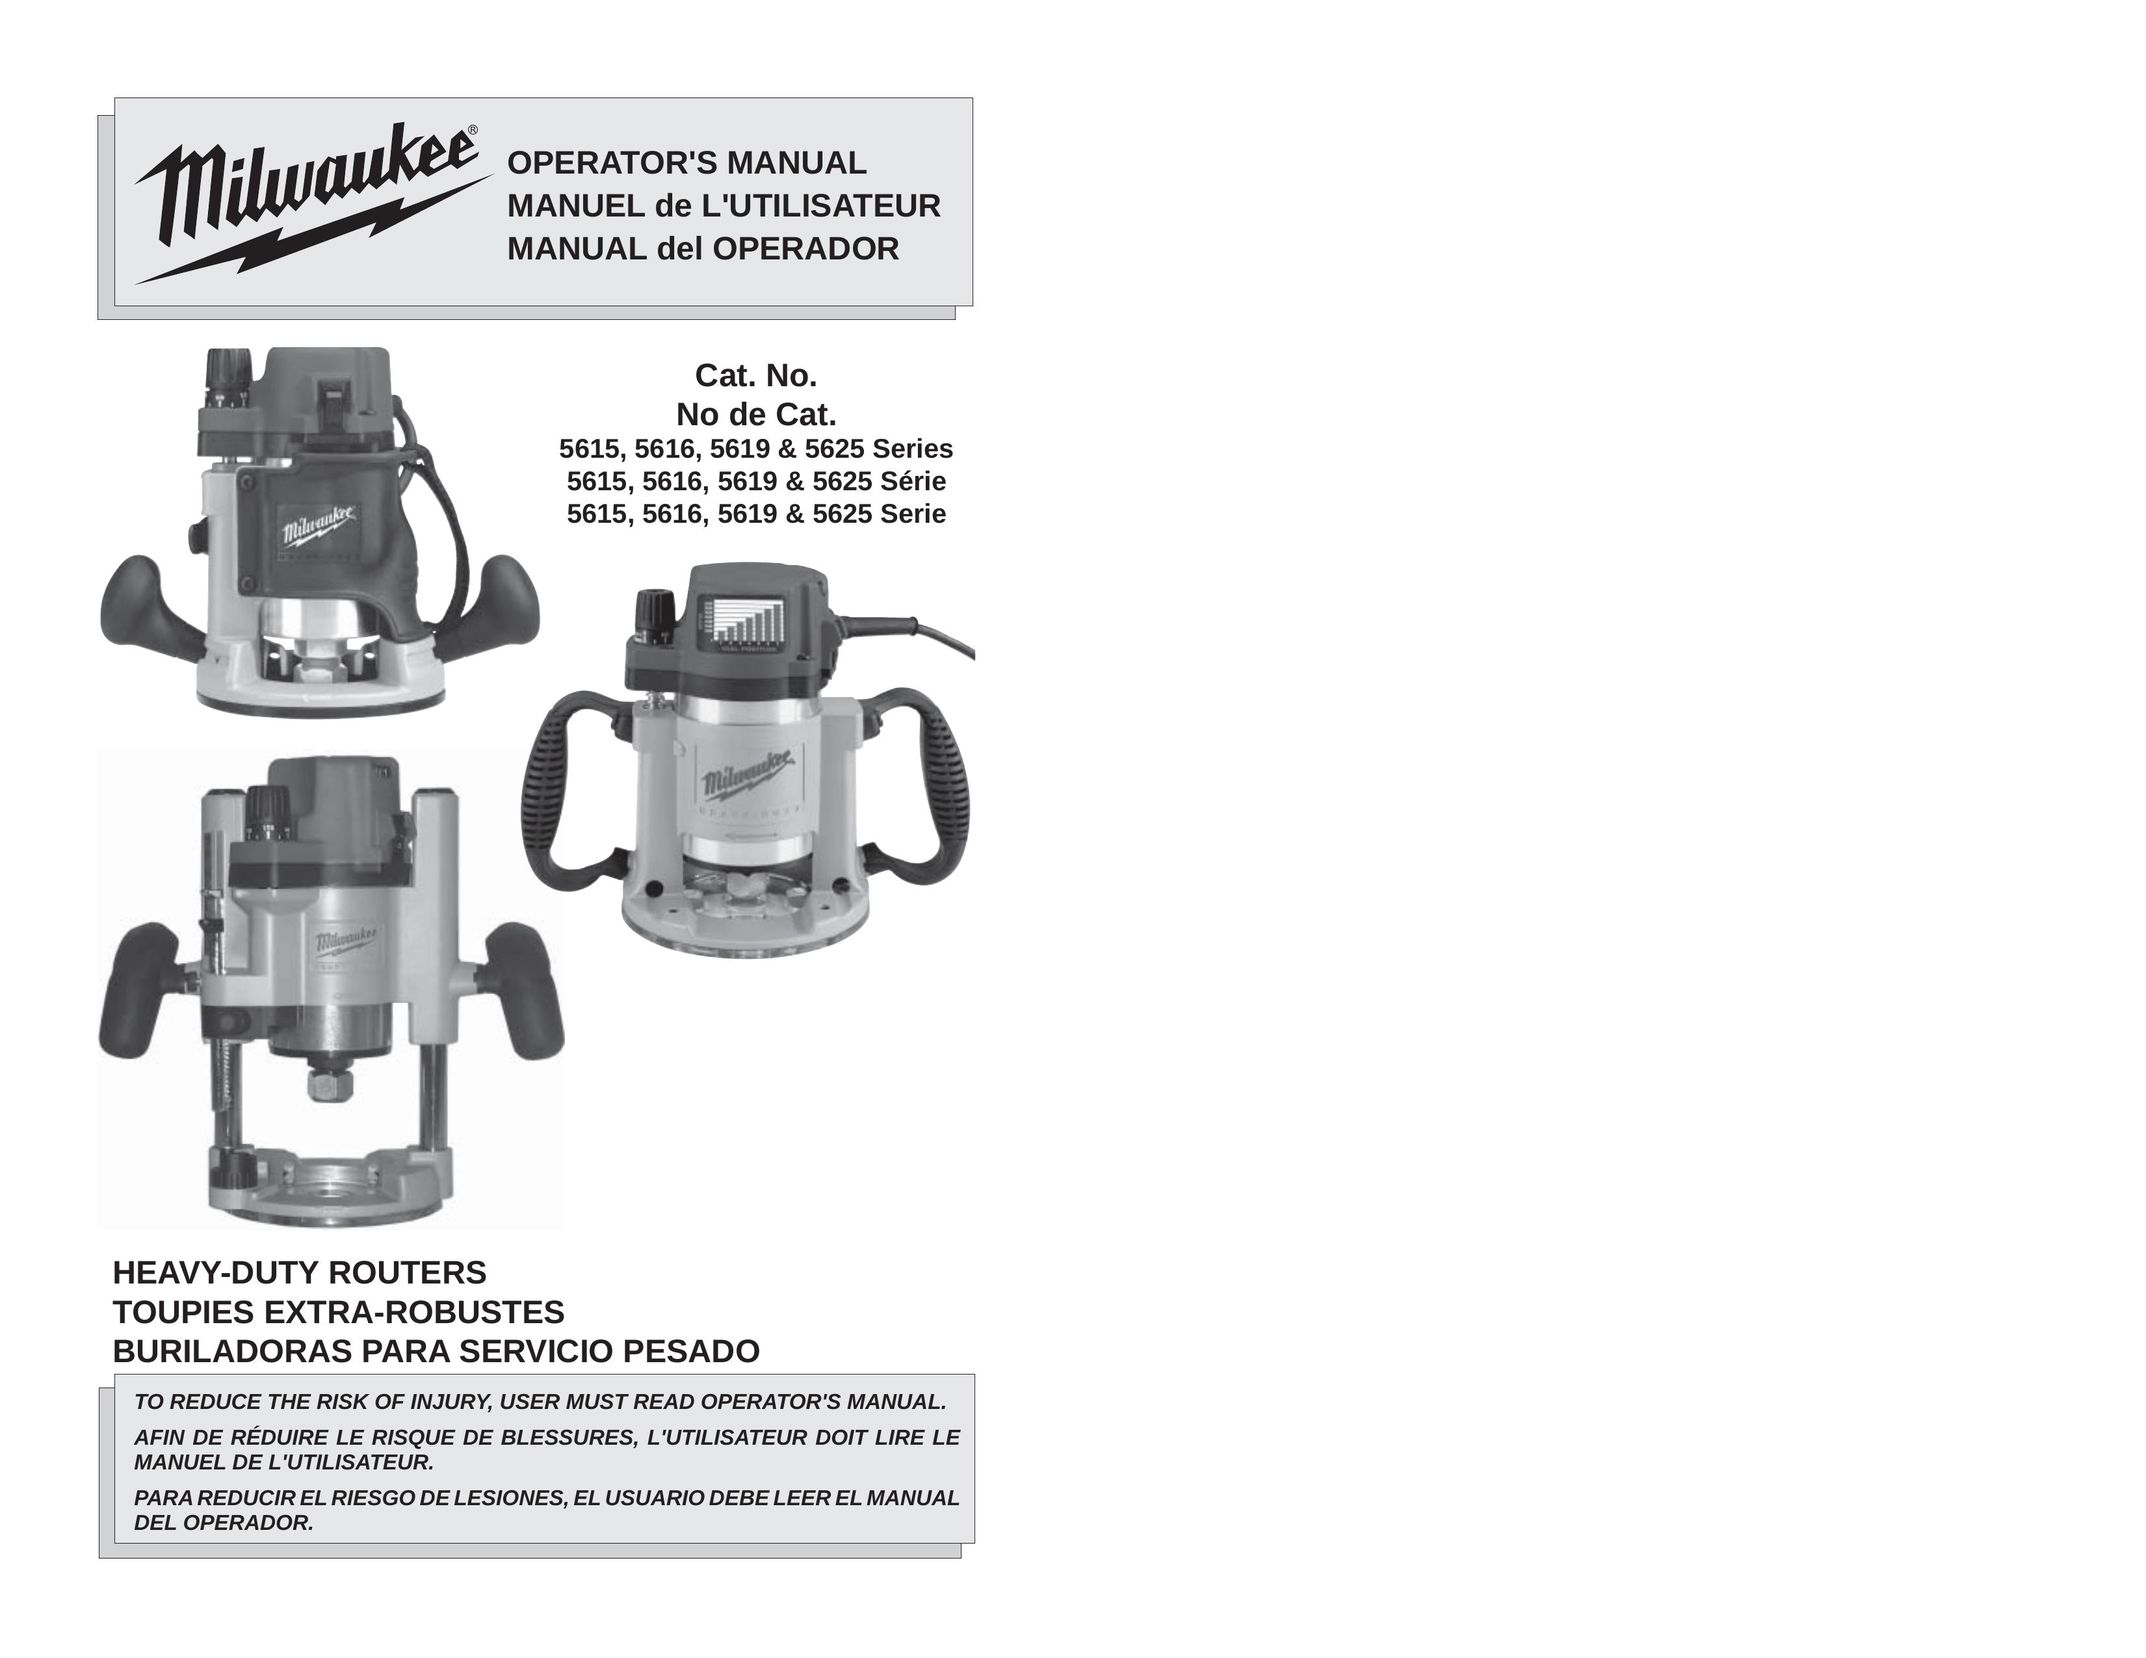 Milwaukee 5625 Series Router User Manual